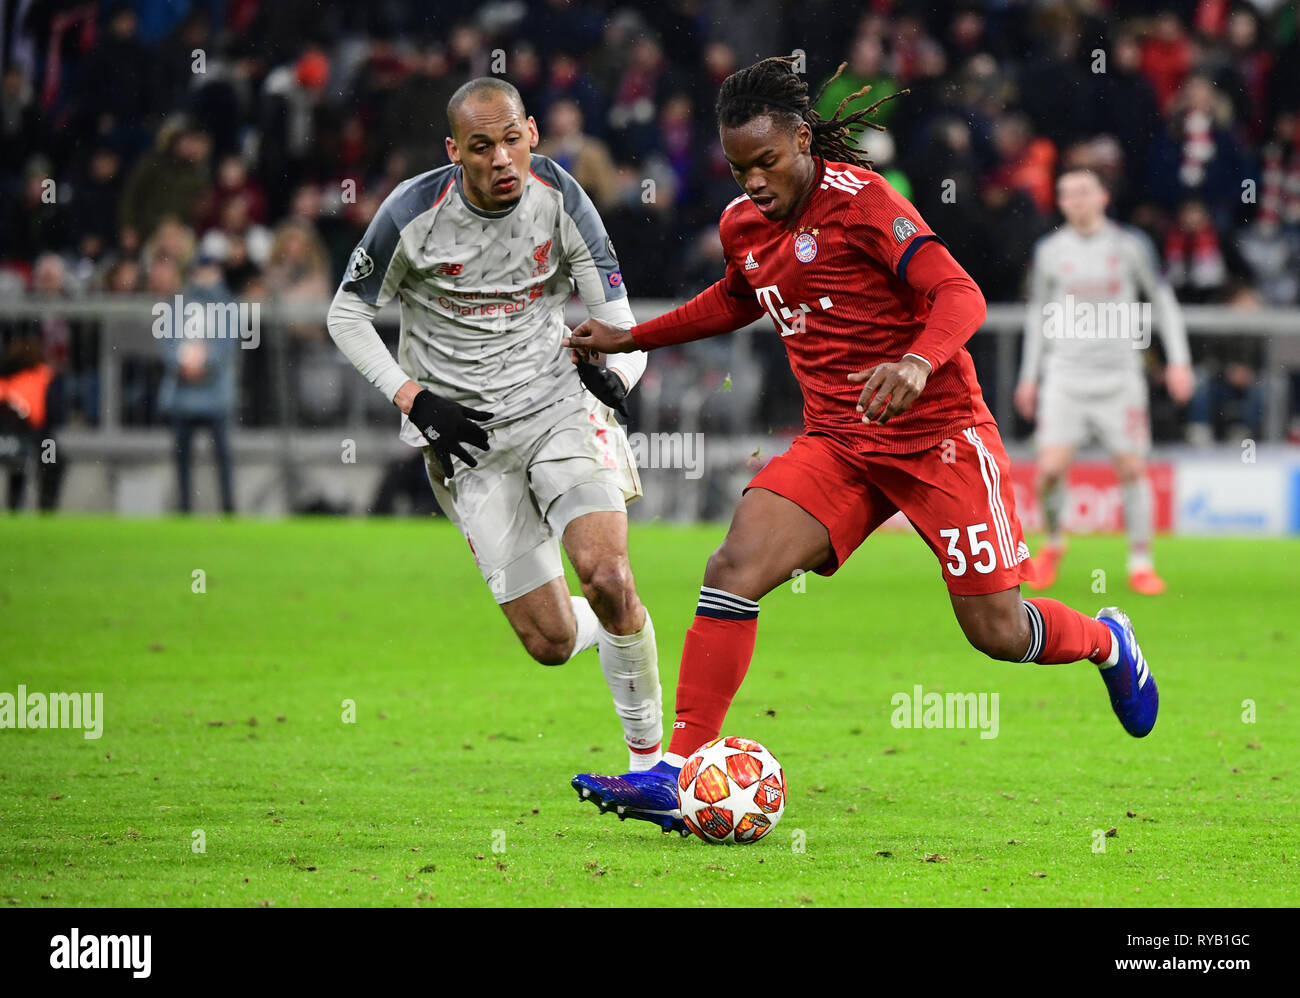 Munich, Germany. 13th Mar, 2019. Soccer: Champions League, knockout round, round of sixteen, second leg: FC Bayern Munich - FC Liverpool in the Allianz Arena. Munich's Renato Sanches (r) and Liverpool's Joel Matip fight for the ball. Photo: Peter Kneffel/dpa Stock Photo